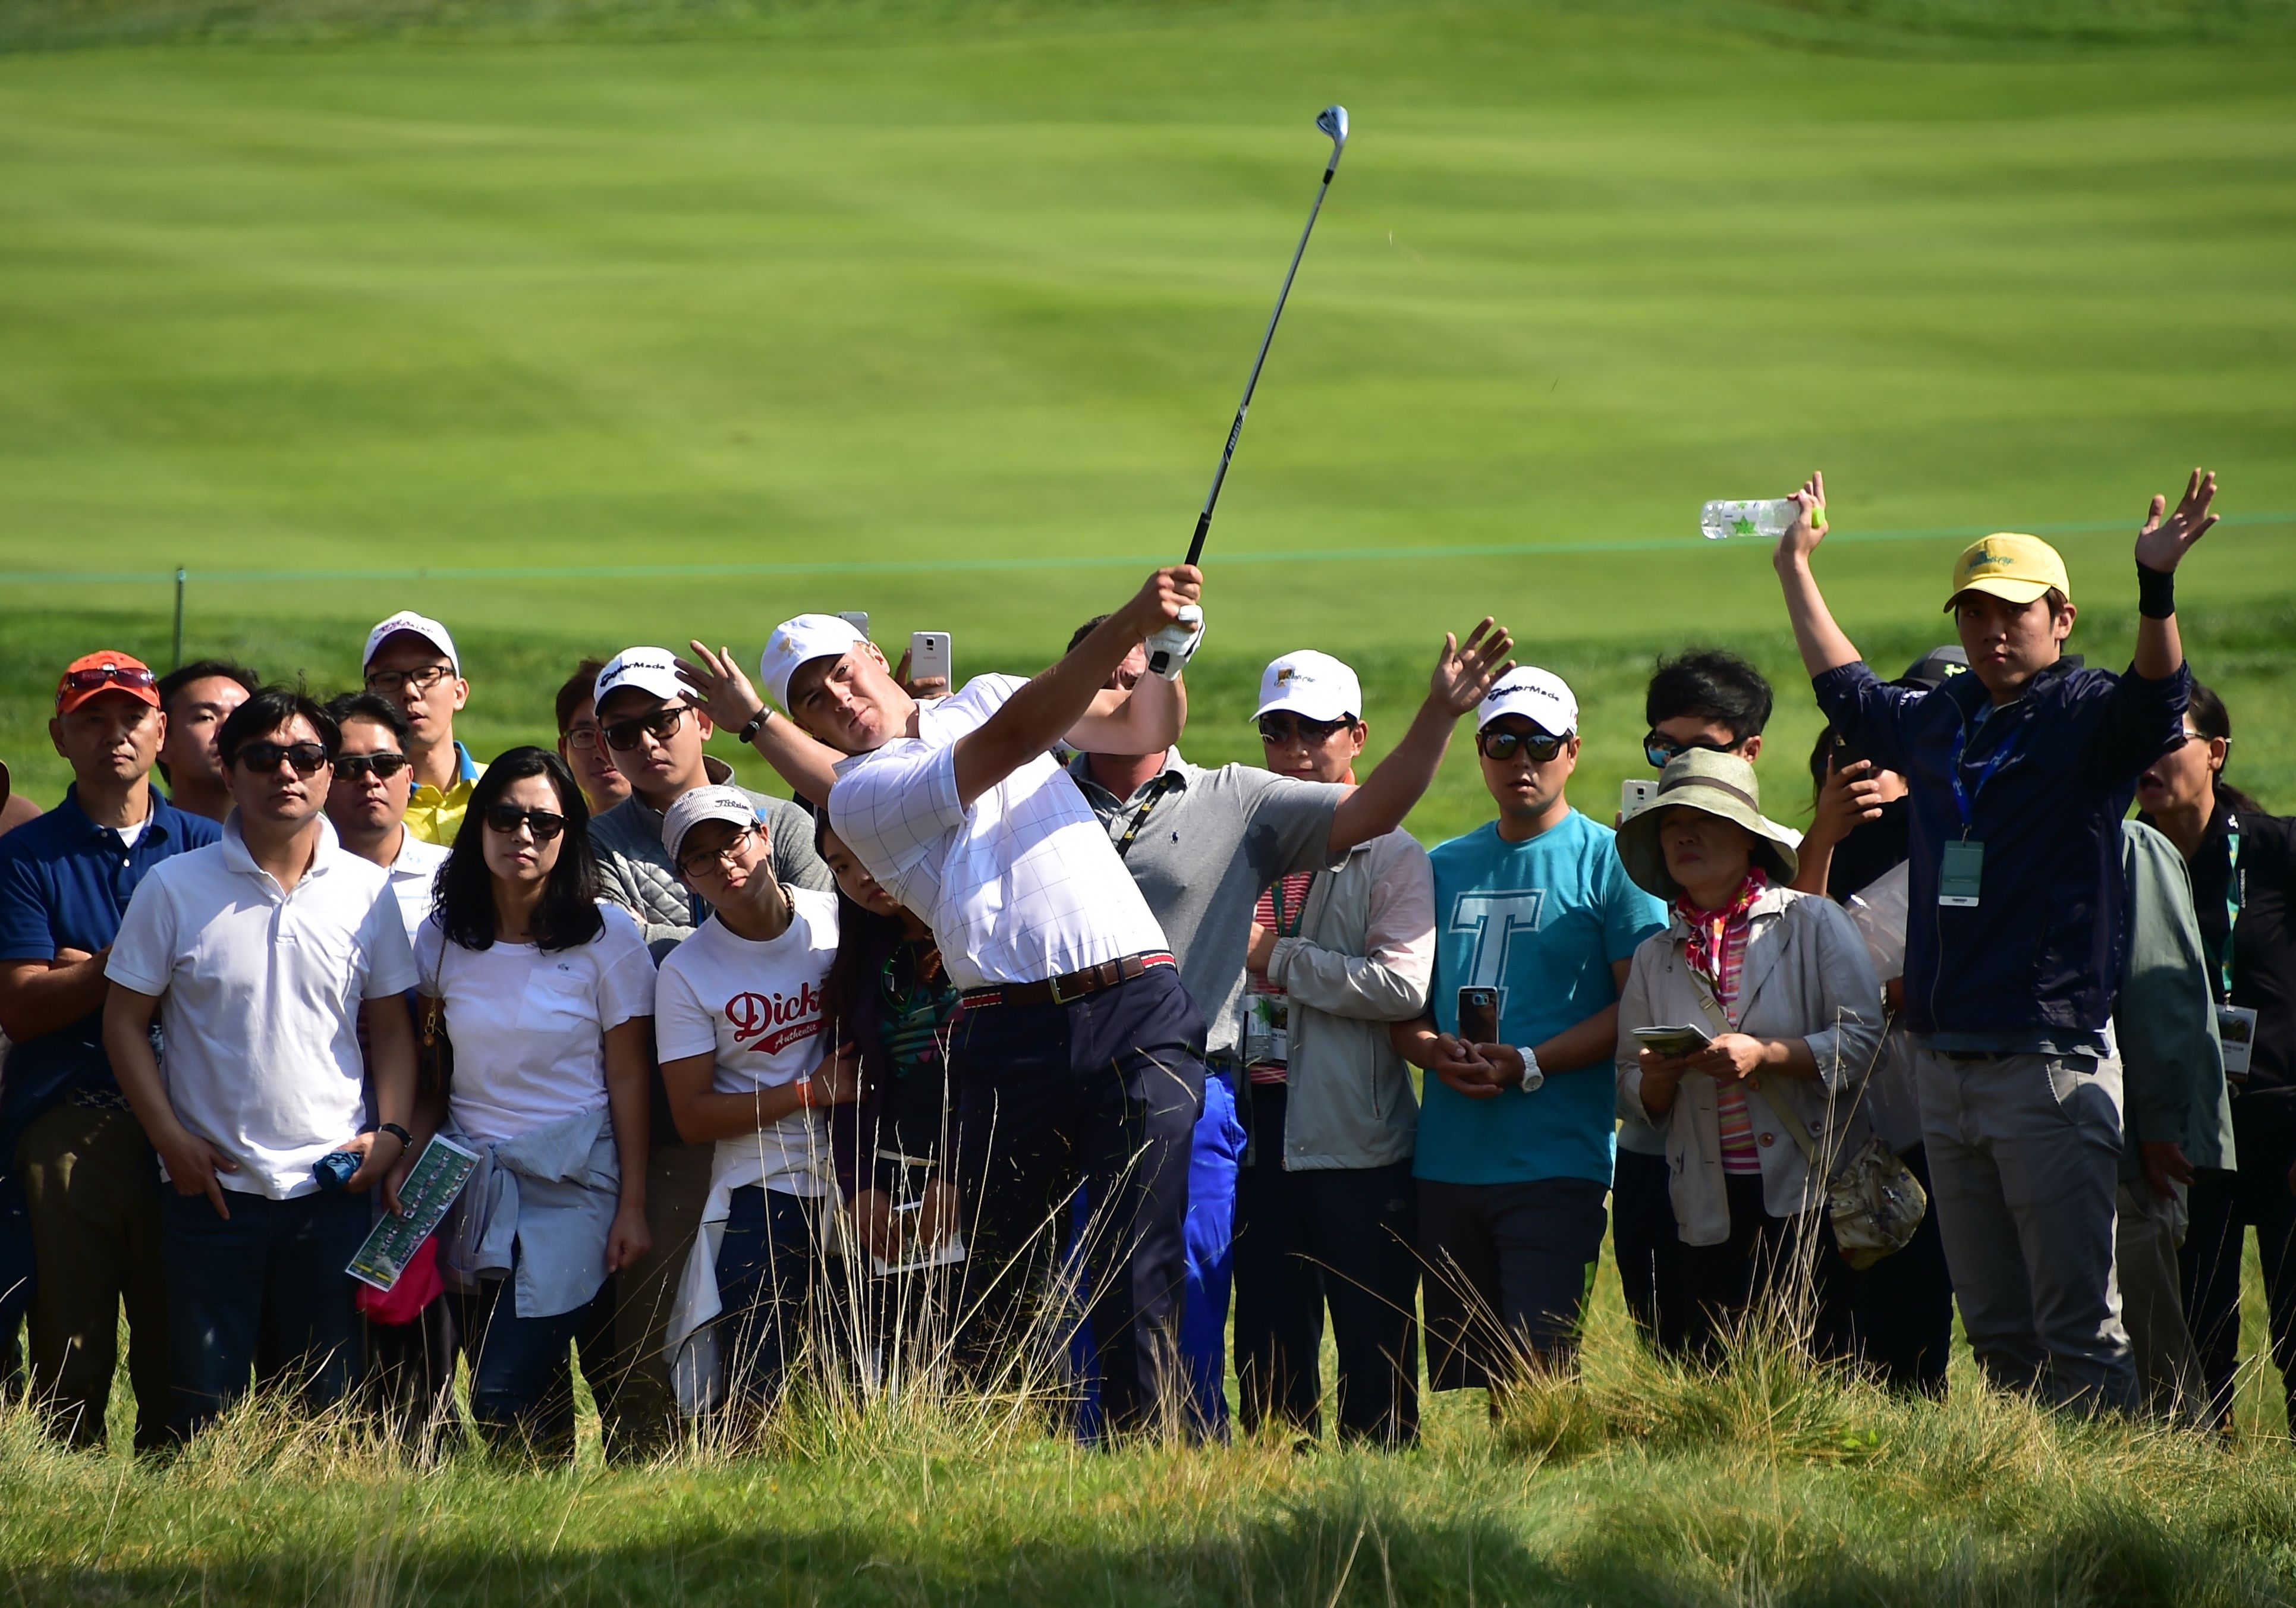 TOPSHOTSnJordan Spieth (C) of the US hits a shot from the rough on the 1st hole during the first round of foursome matches at the 2015 Presidents Cup at the Jack Nicklaus Golf Club in Incheon, west of Seoul, on October 8, 2015.     AFP PHOTO / JUNG YEON-JE     nRESTRICTED TO EDITORIAL USE - STRICTLY NO COMMERCIAL USE